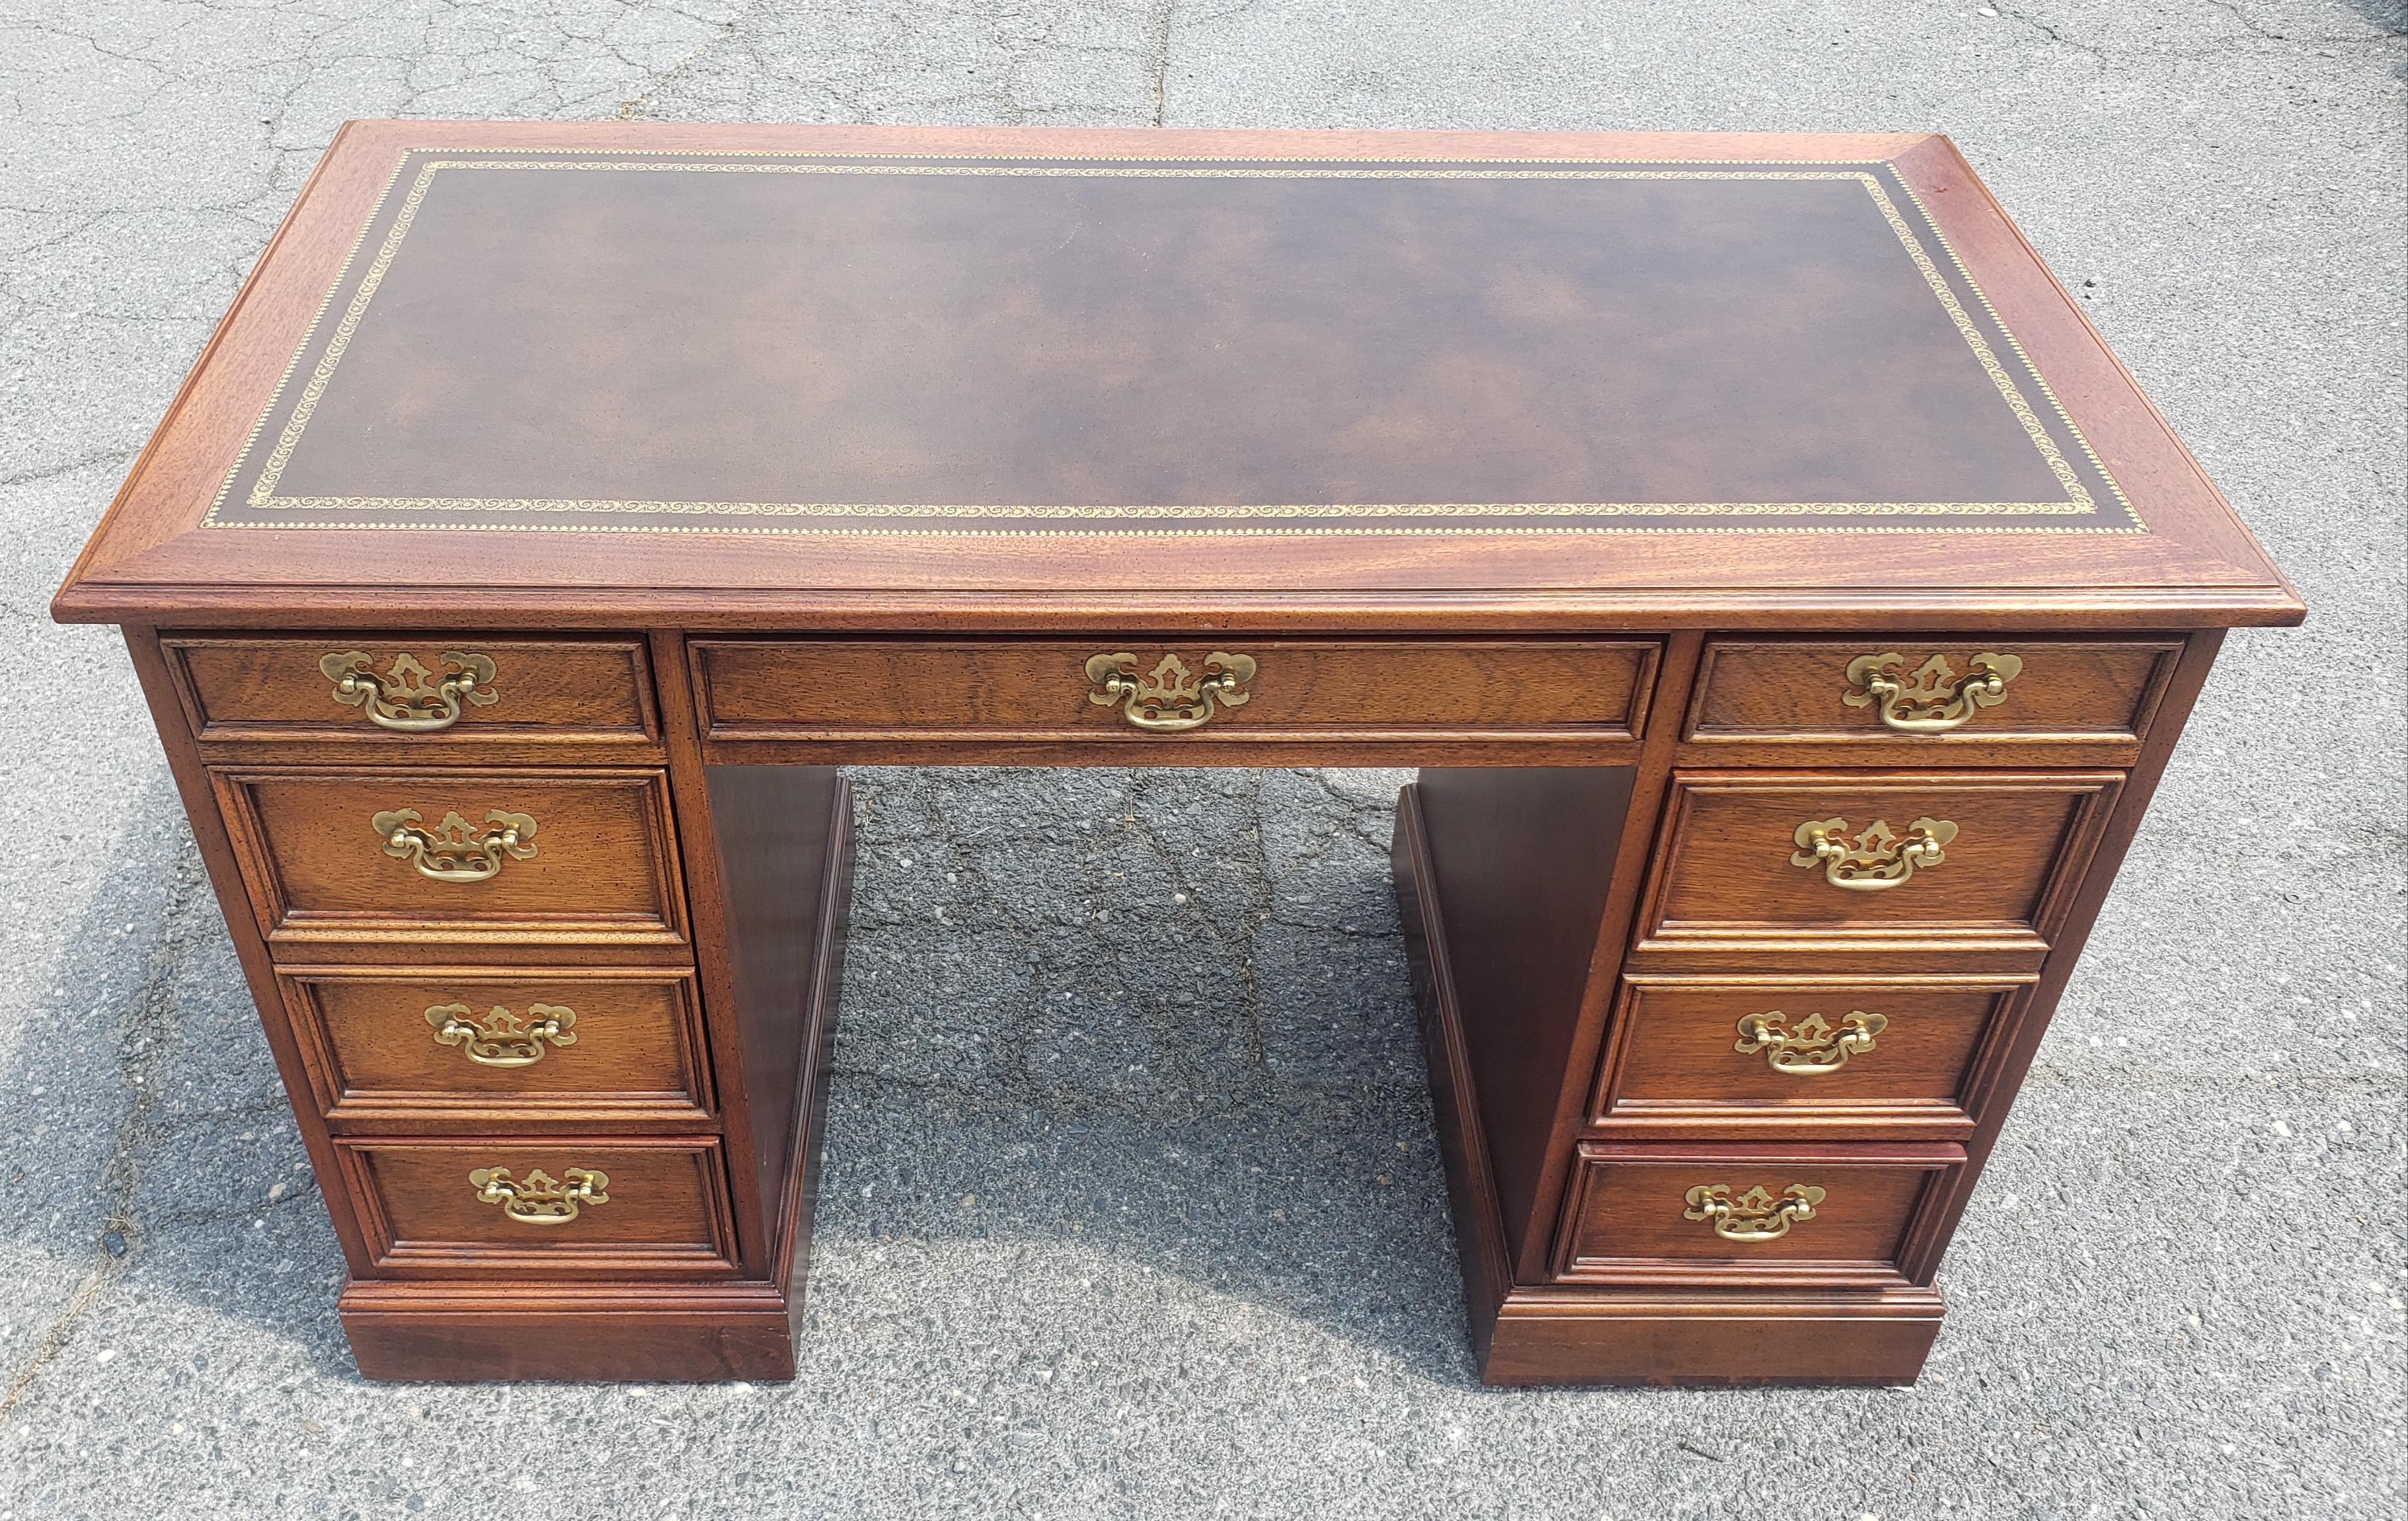 American Sligh Furniture Chippendale Mahogany and Tooled Leather Partners Desk with Glass